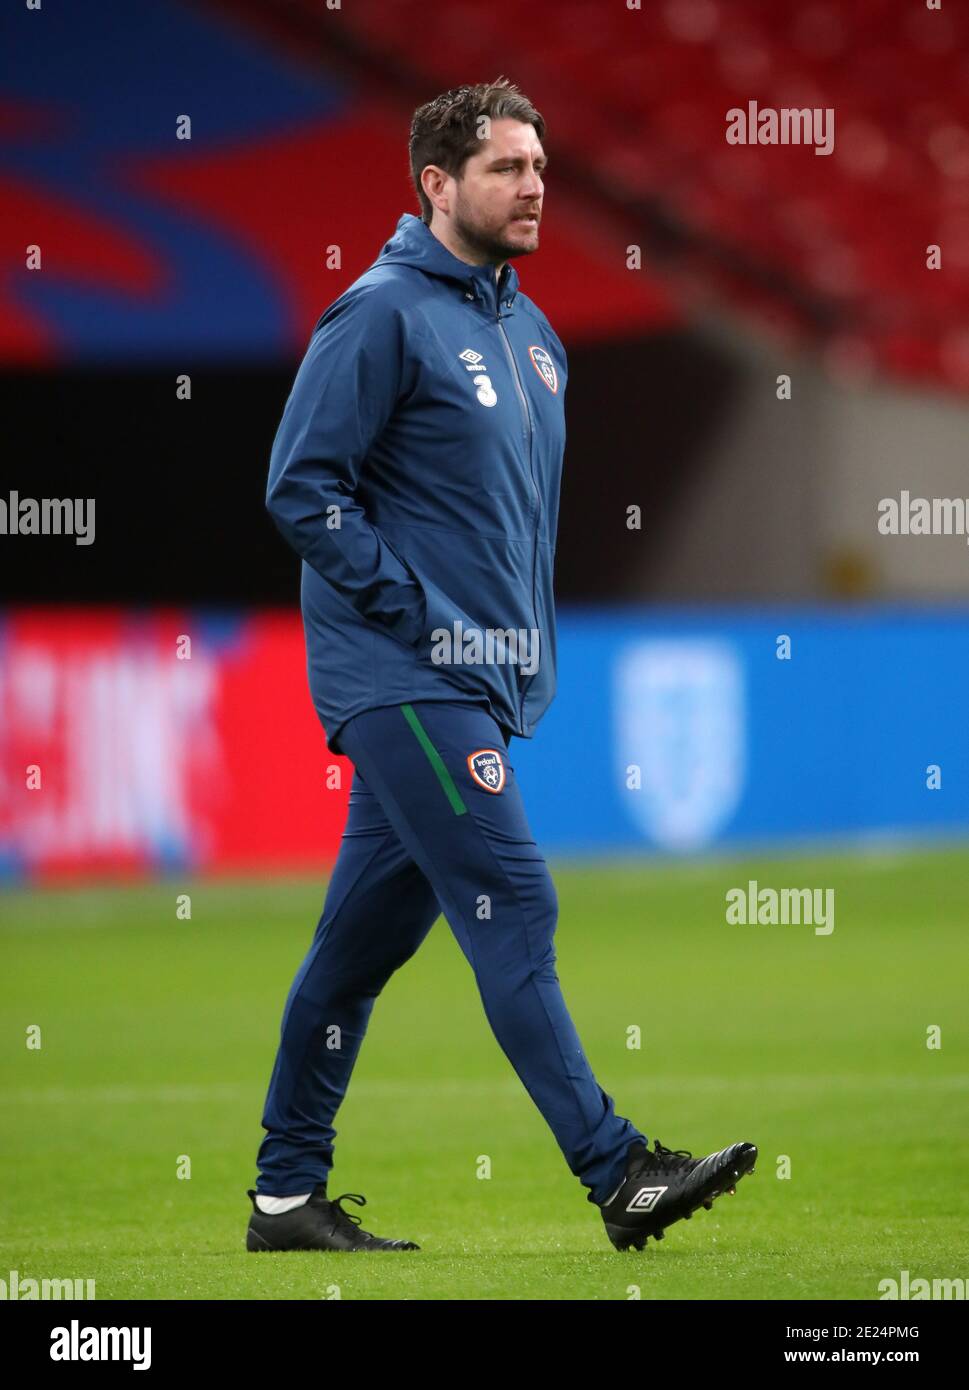 Republic of Ireland's Chief Scout and Oppostion Analyst Ruaidhri Higgins during the international friendly at Wembley Stadium, London. Stock Photo